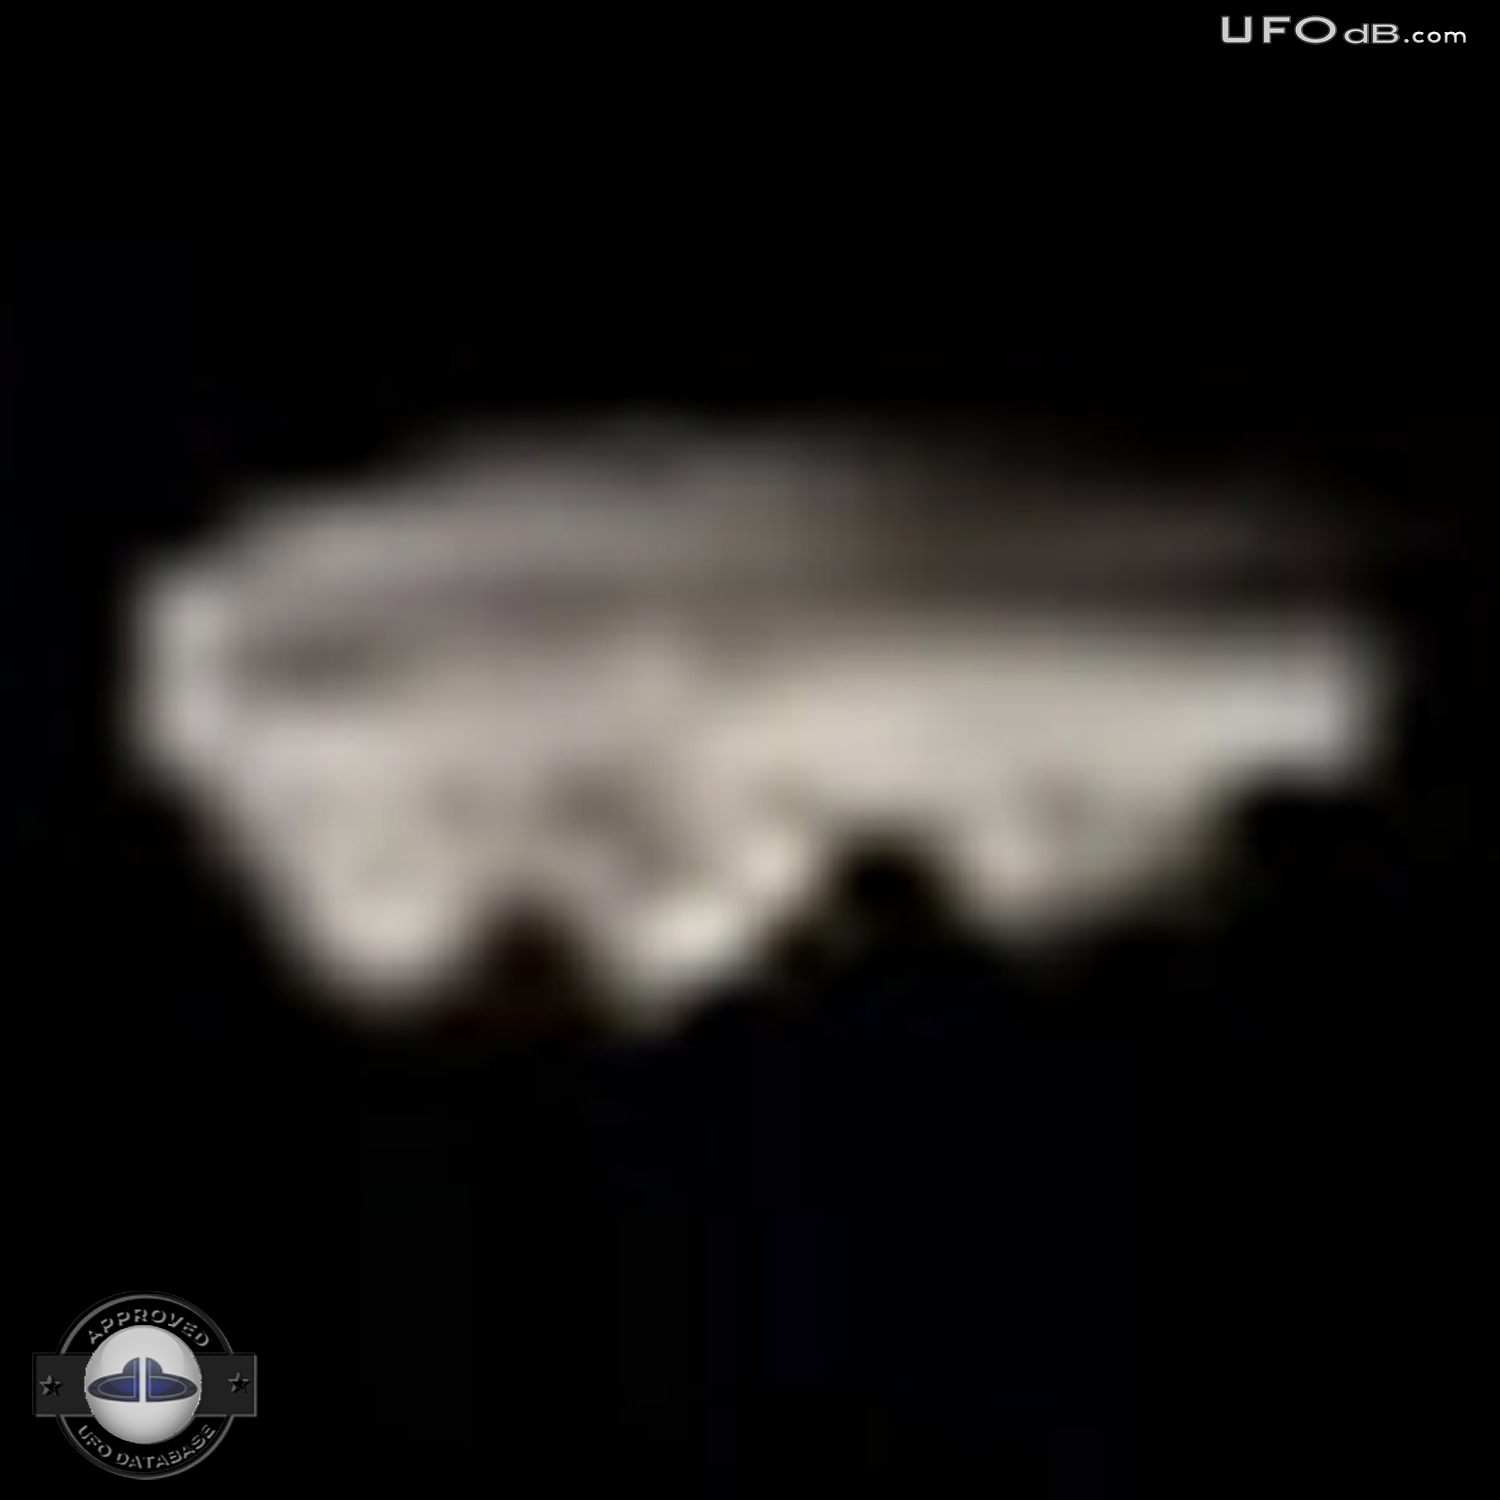 Very Strange UFO caught on picture over Rome | Italy | January 19 2011 UFO Picture #312-6